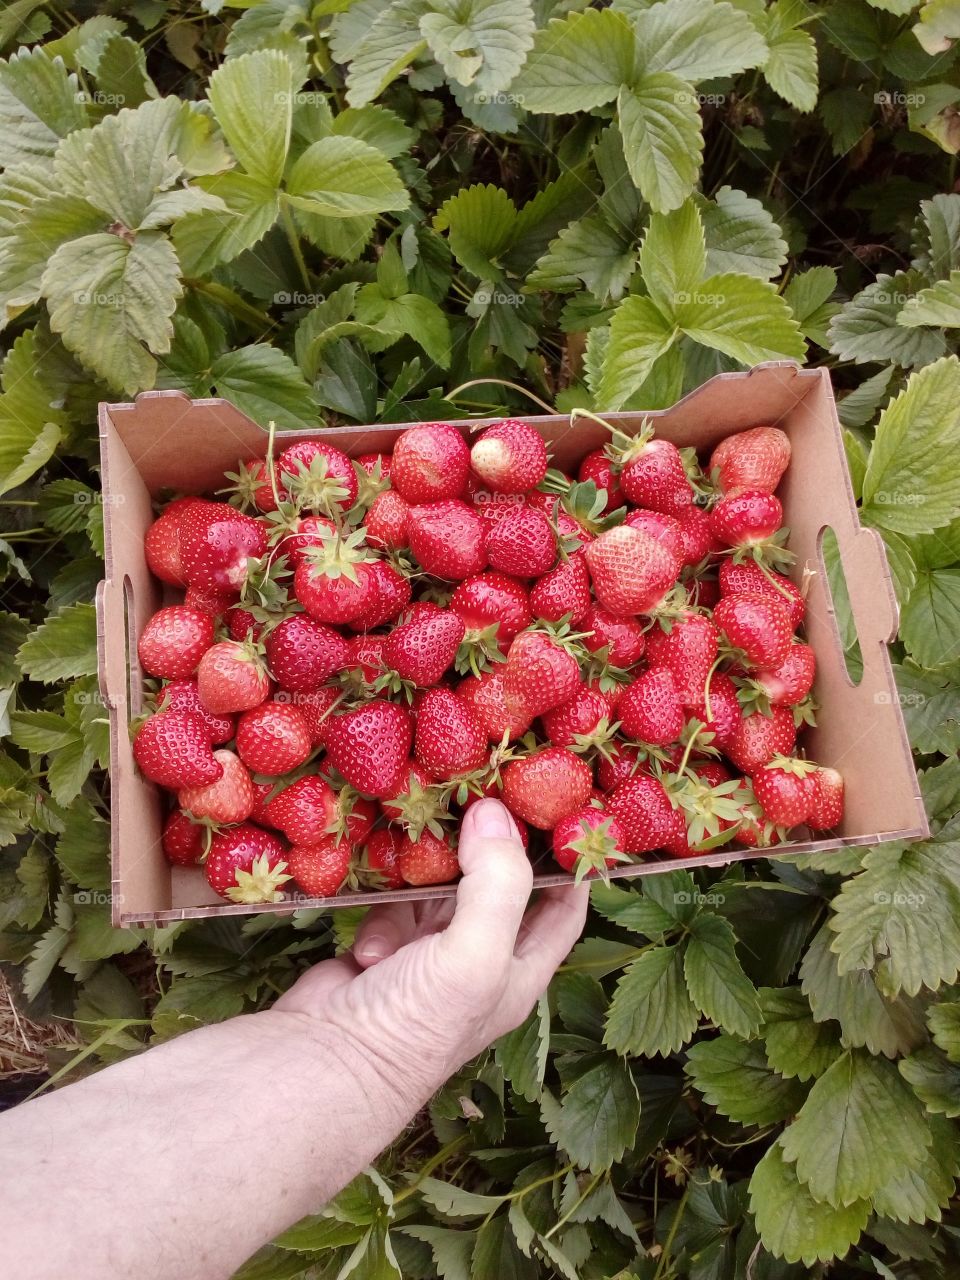 business strawberry farmers in box